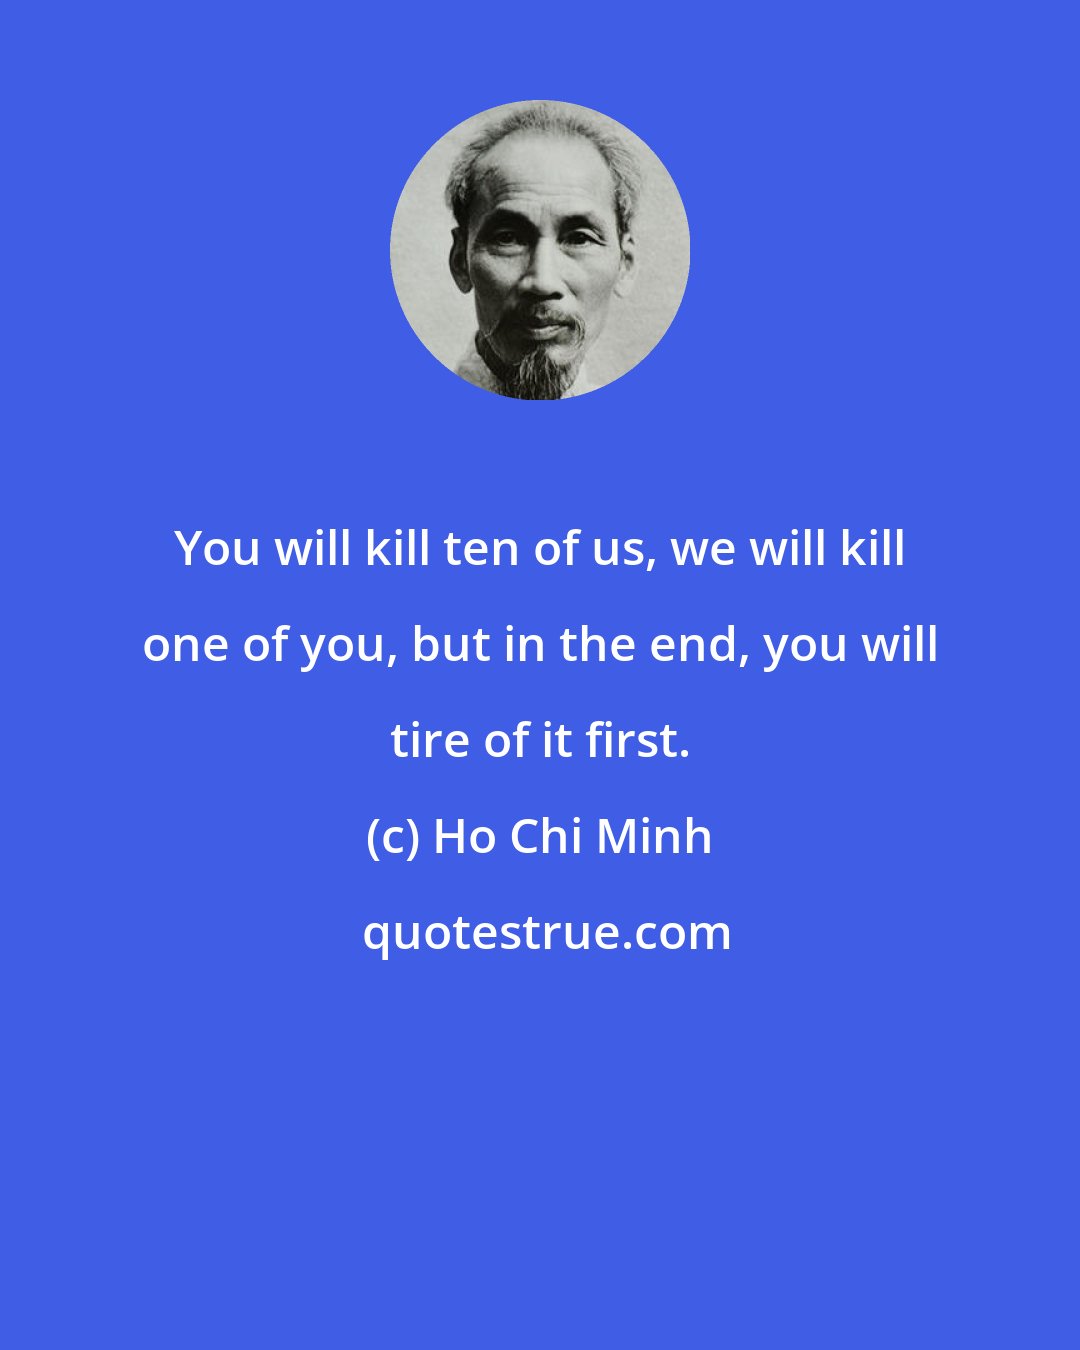 Ho Chi Minh: You will kill ten of us, we will kill one of you, but in the end, you will tire of it first.